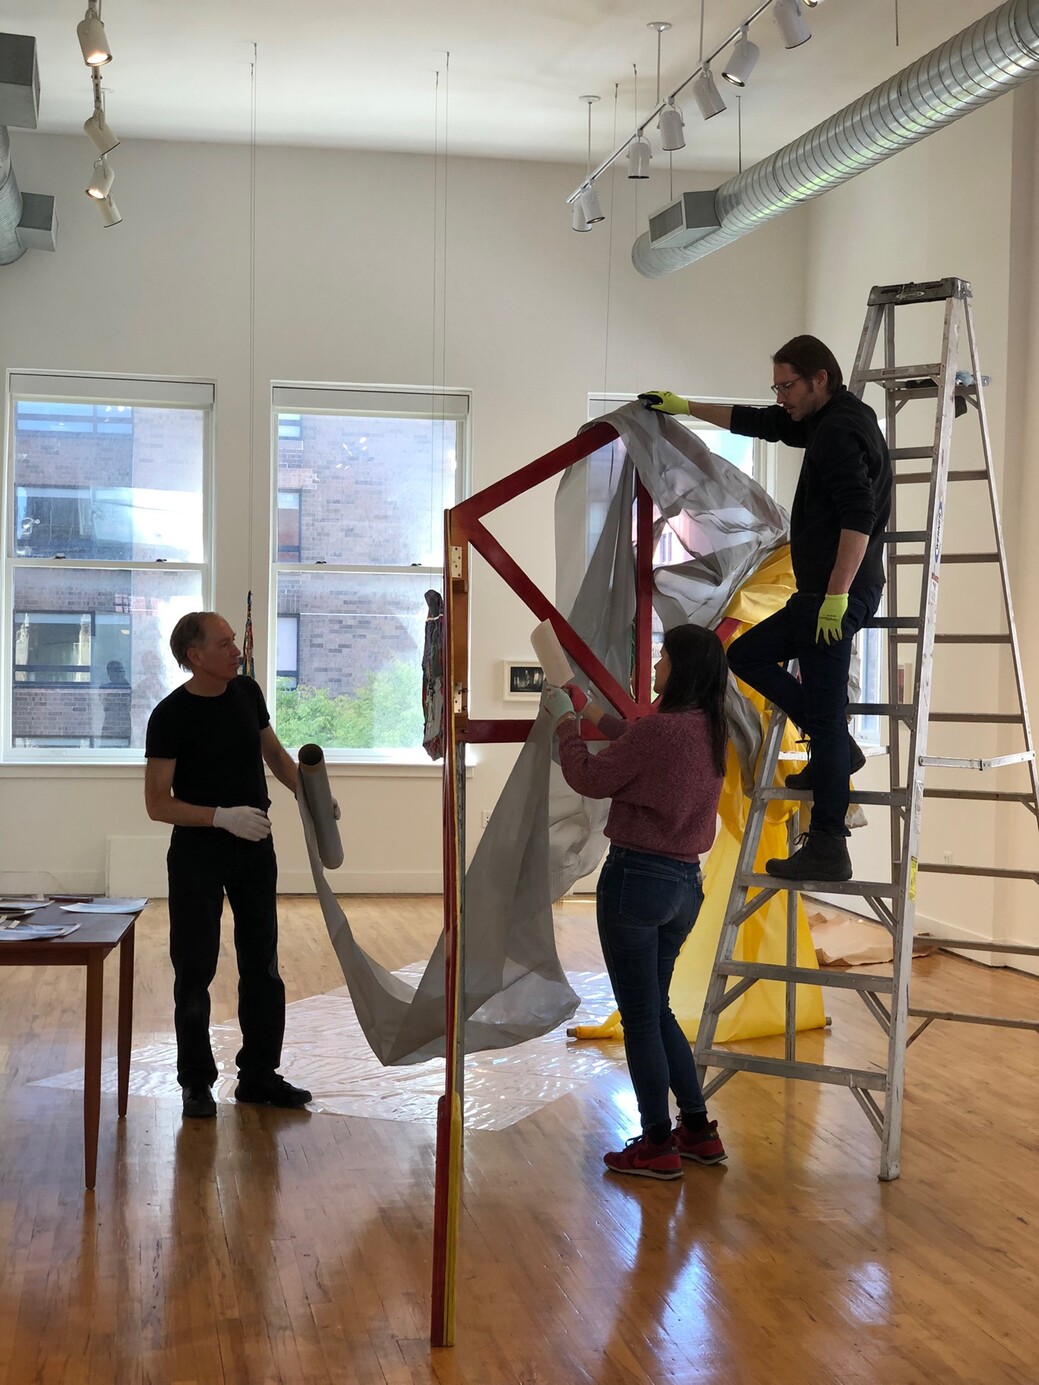 The Estate of Rosemary Mayer installing her sculpture Portae (1974), for the exhibition "Future Variations," at Soft Network, 2022. Photo by Sara VanDerBeek.